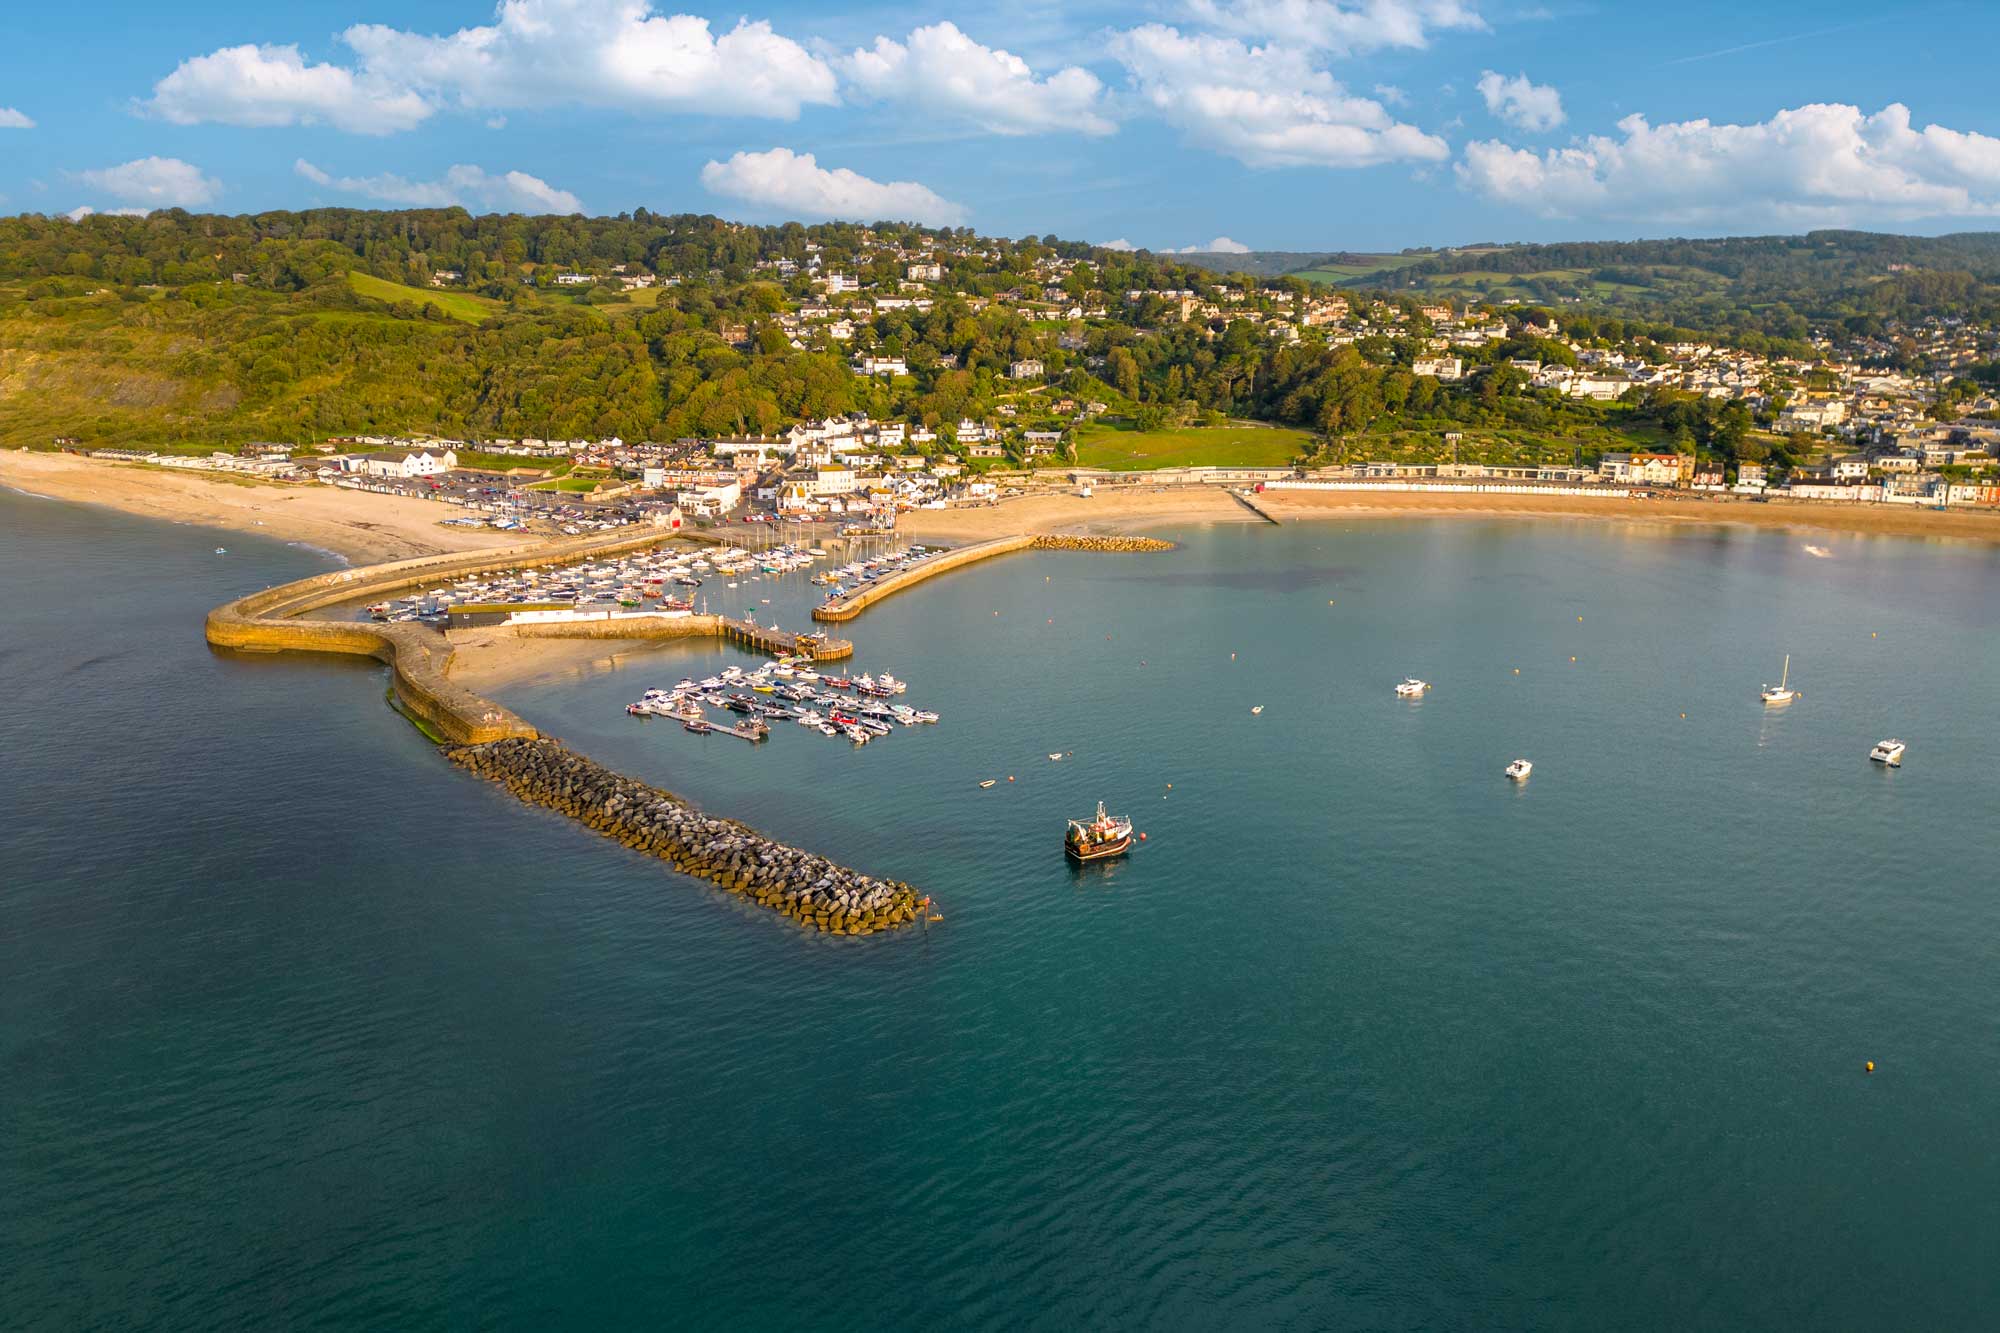 Holiday let photographer in Lyme Regis